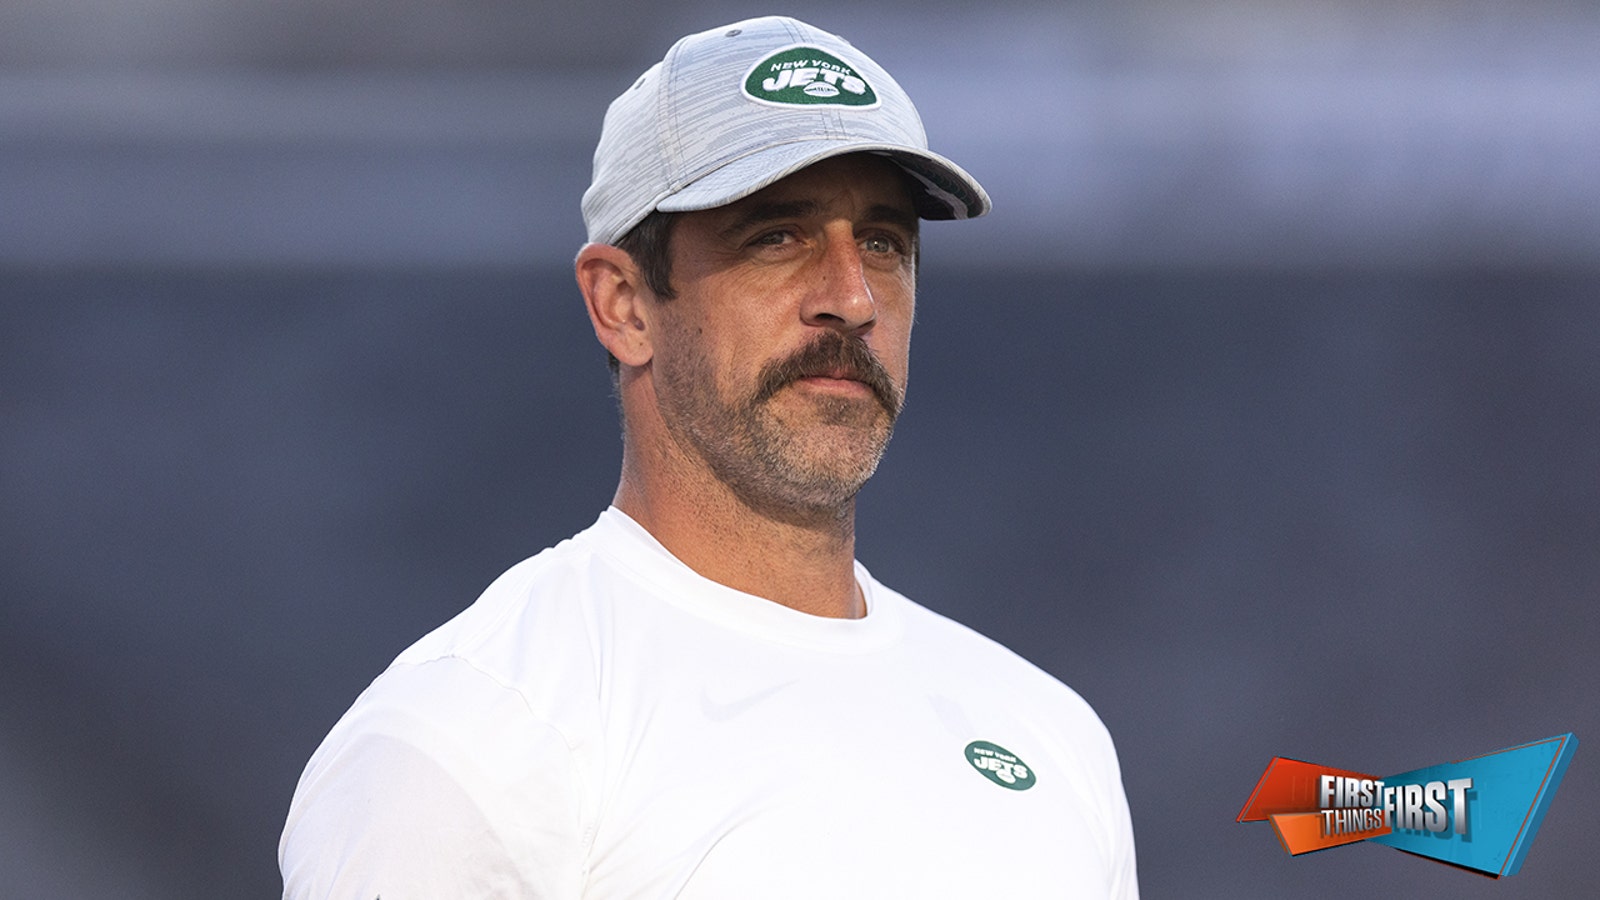 Aaron Rodgers challenges Jets O-Line: "There's jobs up for grabs"